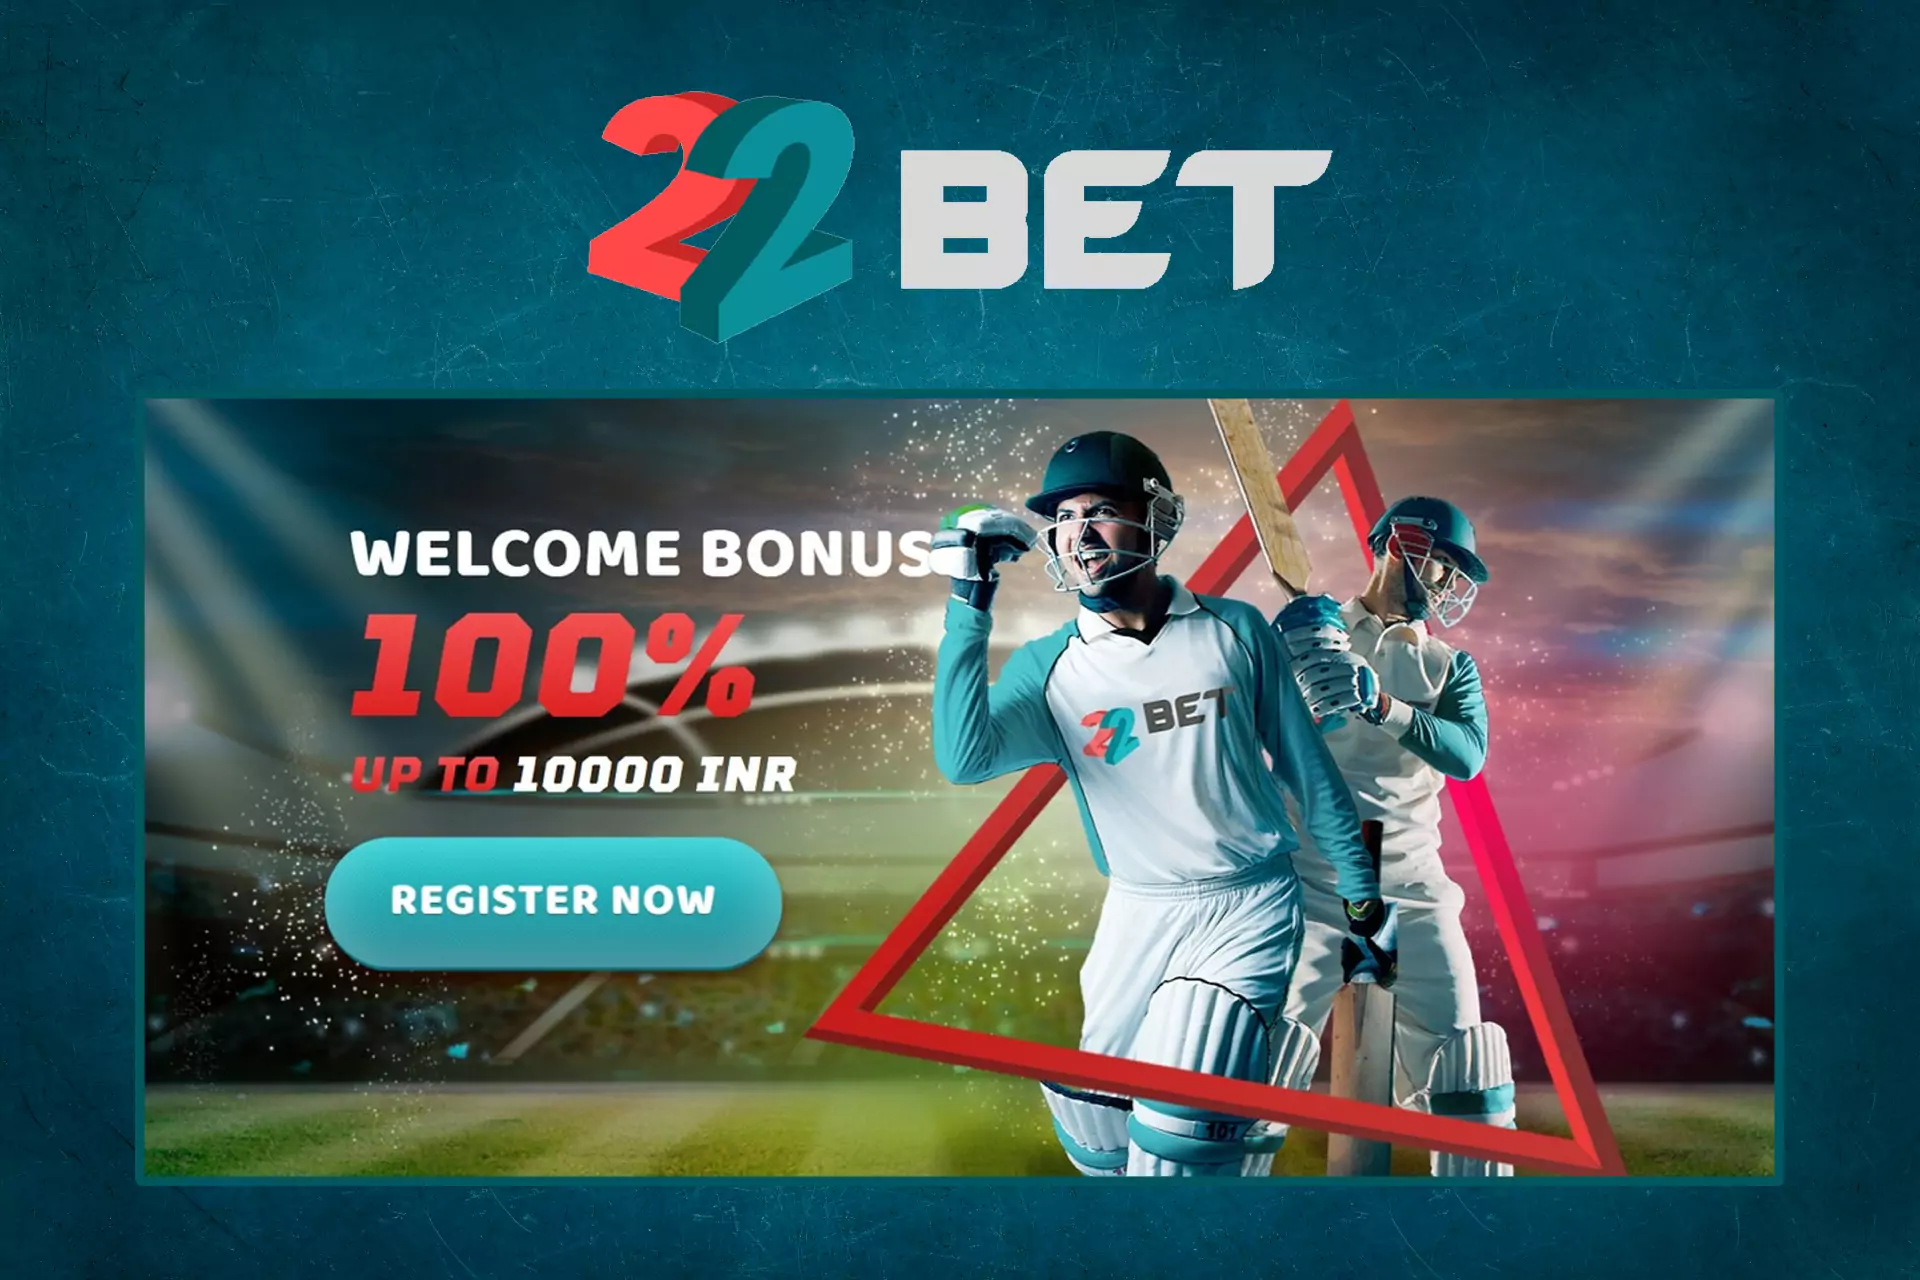 There is a welcome bonus for new users on 22bet.